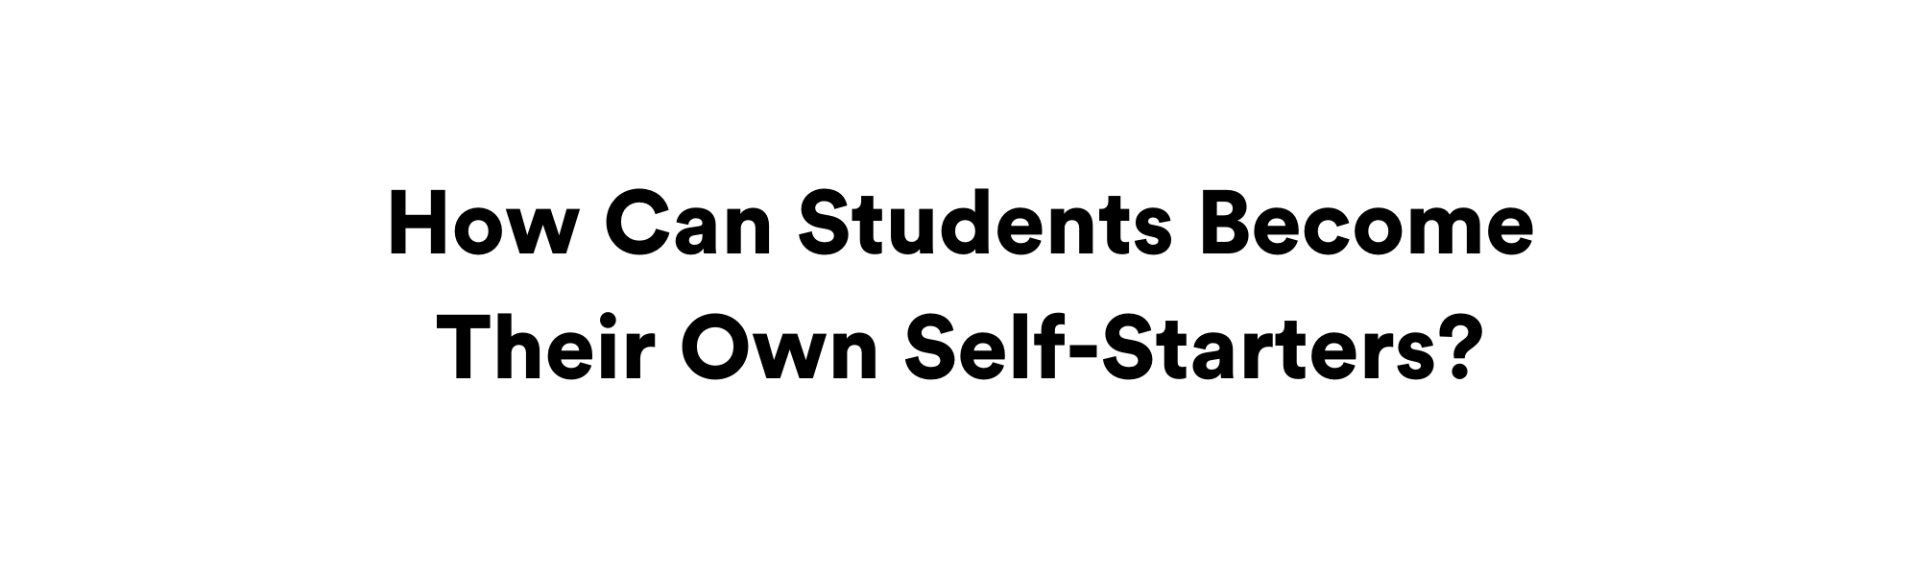 How Can Students Become Their Own Self-Starters?